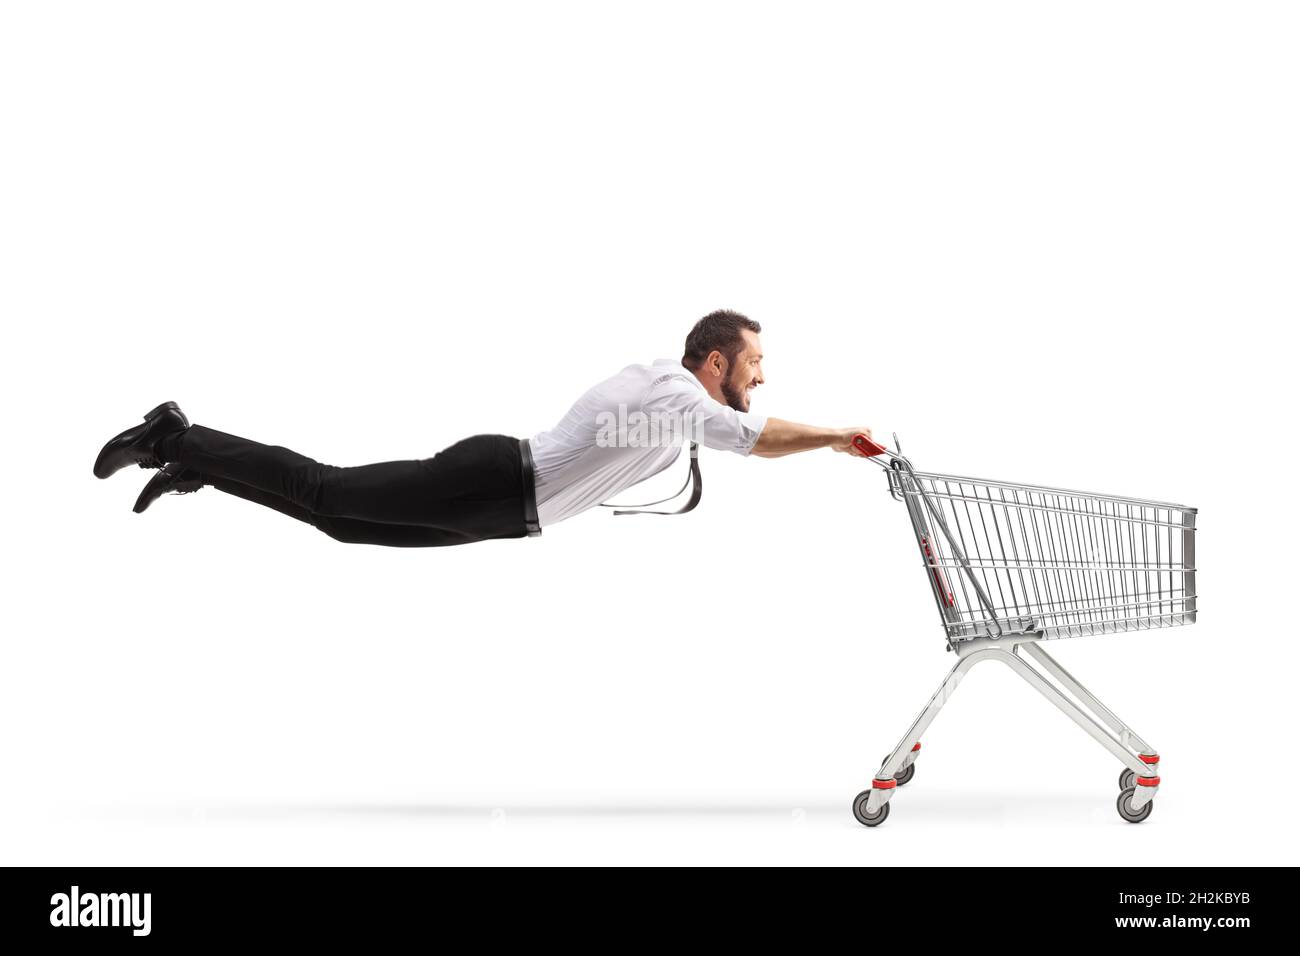 man-flying-with-an-empty-shopping-cart-isolated-on-white-background-2H2KBYB.jpg